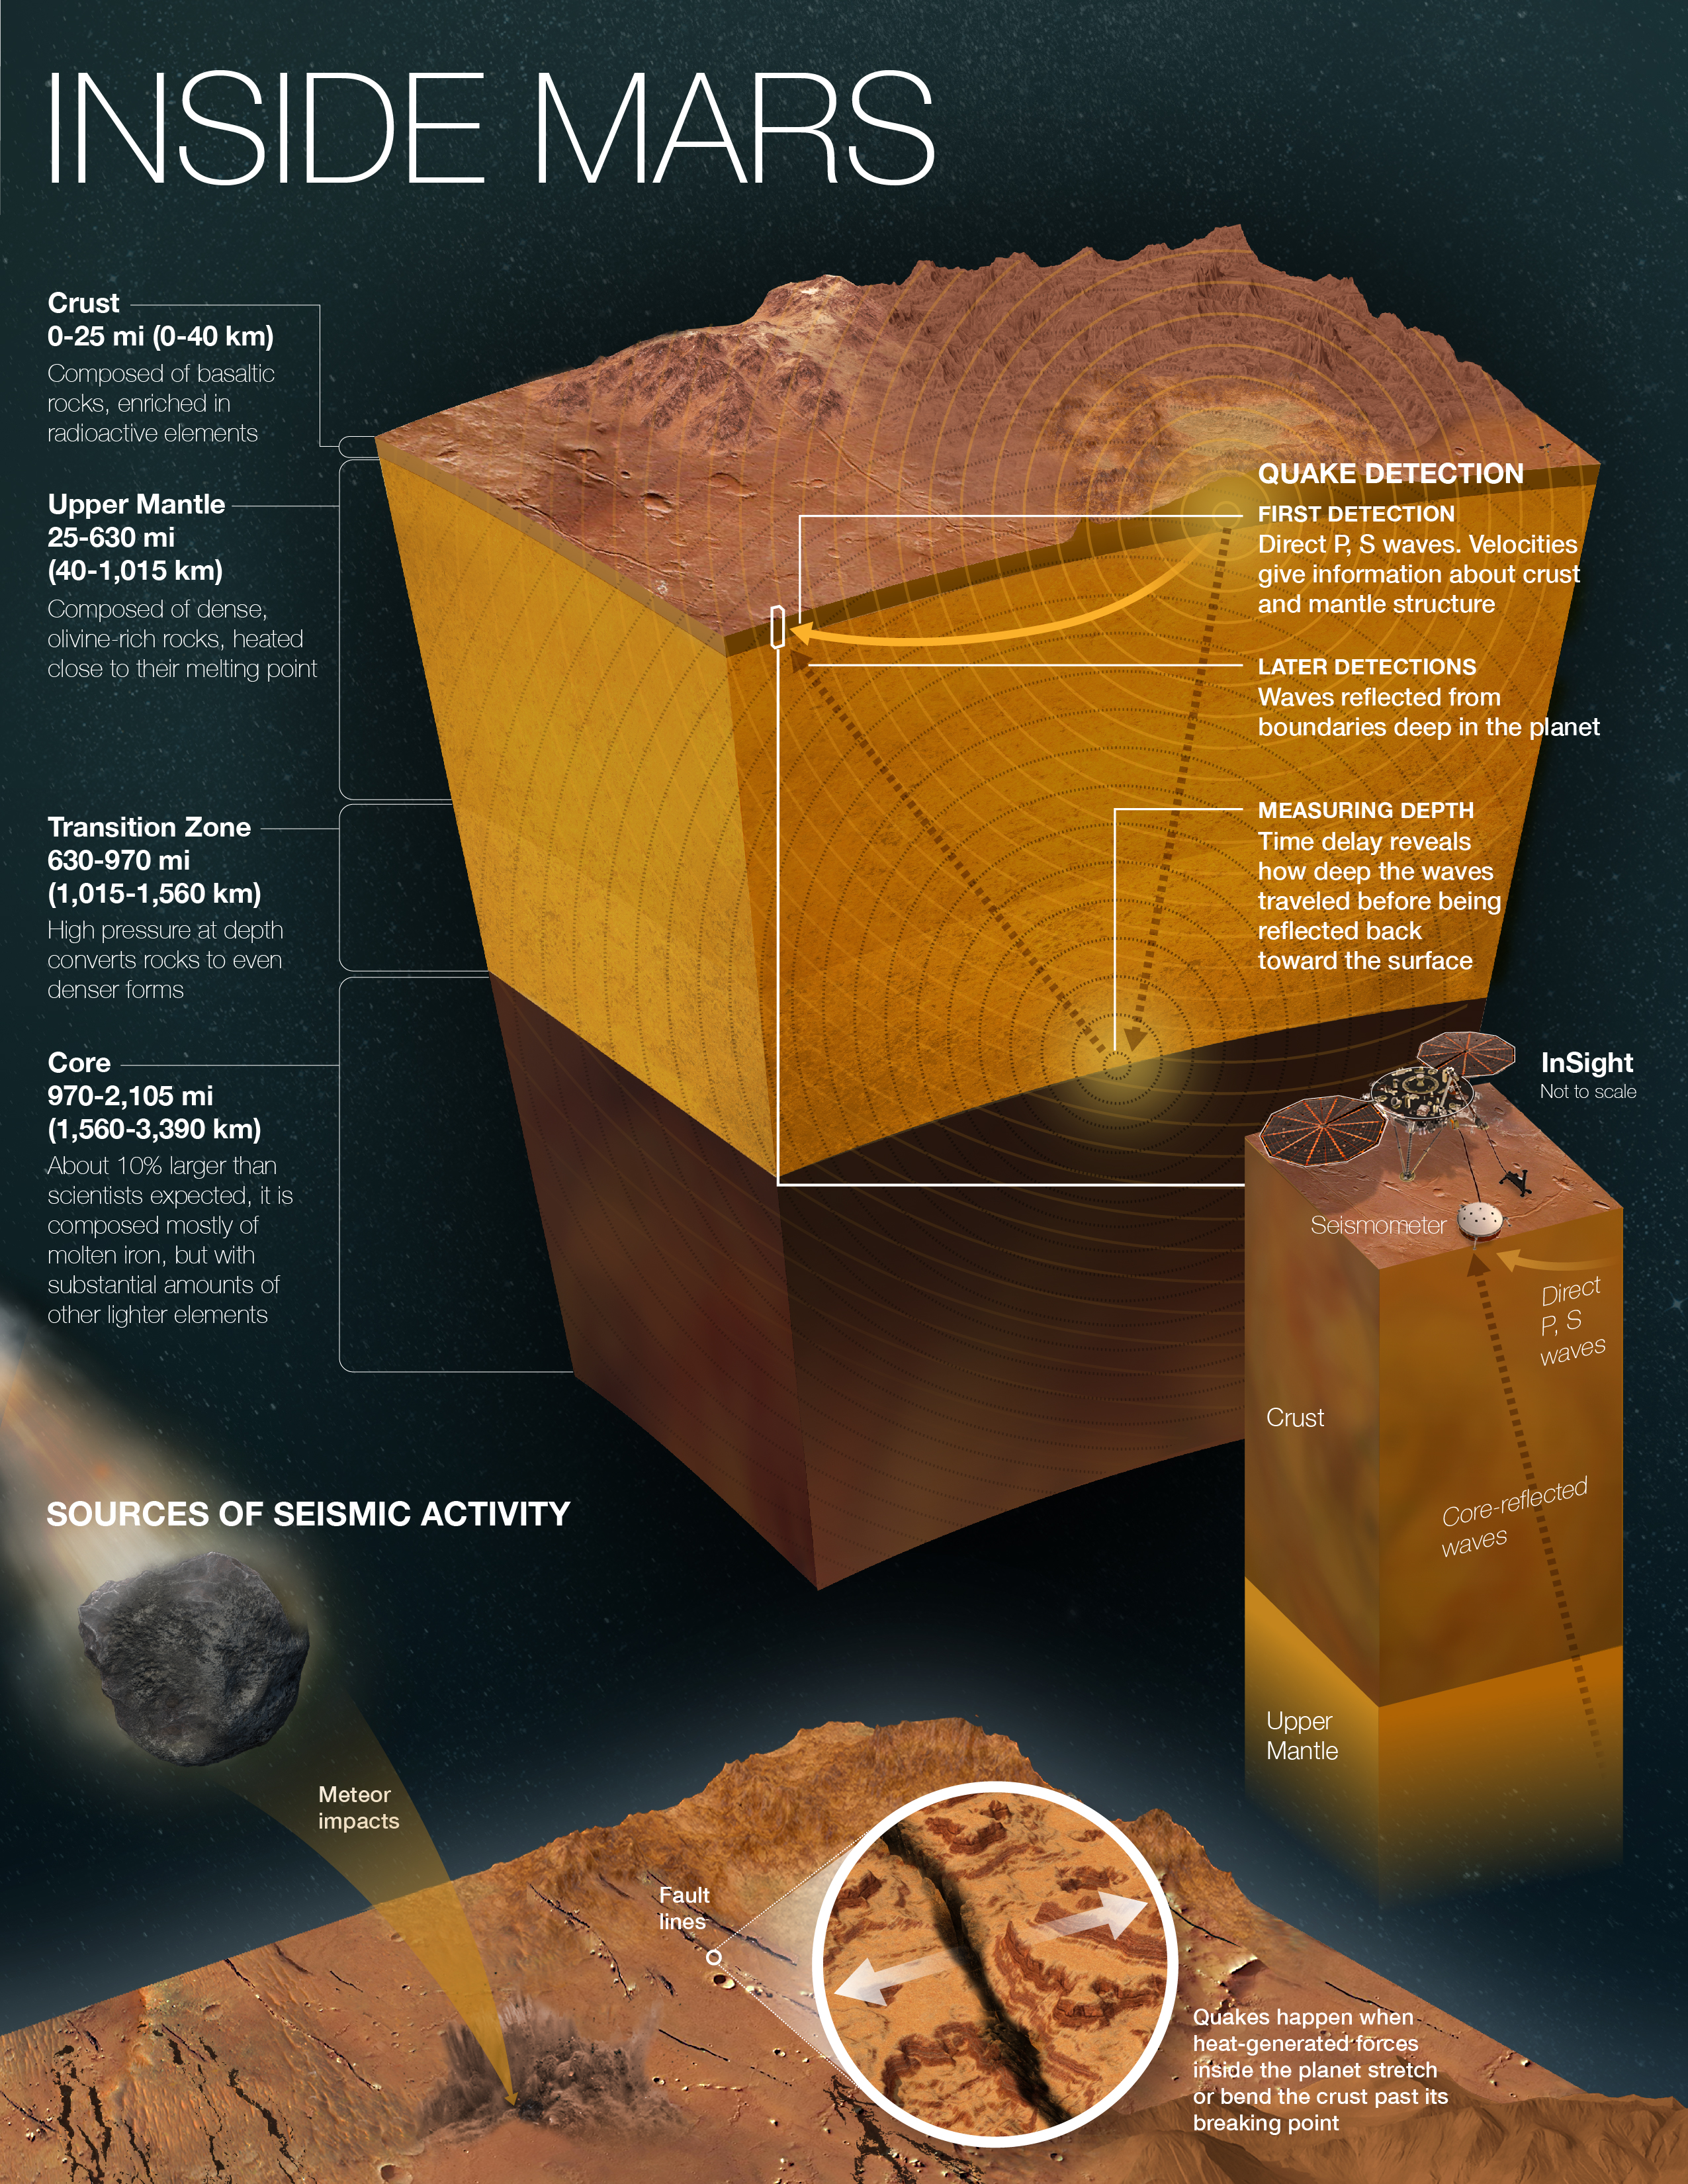 A cutaway view of the interior of Mars shows a crust that is 0-25 mi (0-40 km) deep, an upper mantle that is 25-630 mi (40-1,015 km) deep; a transition zone that is 630-970 mi (1,015-1,560 km) deep, and a Core that is 970-2,105 mi (1,560-3,390 km) deep. Meteor impacts are shown as the sources of seismic activity. A separate inset shows InSight on the surface of a cutaway view of Mars' interior with lines representing Direct P, S waves extending from the upper mantle, through the curst, to SEIS on the surface.